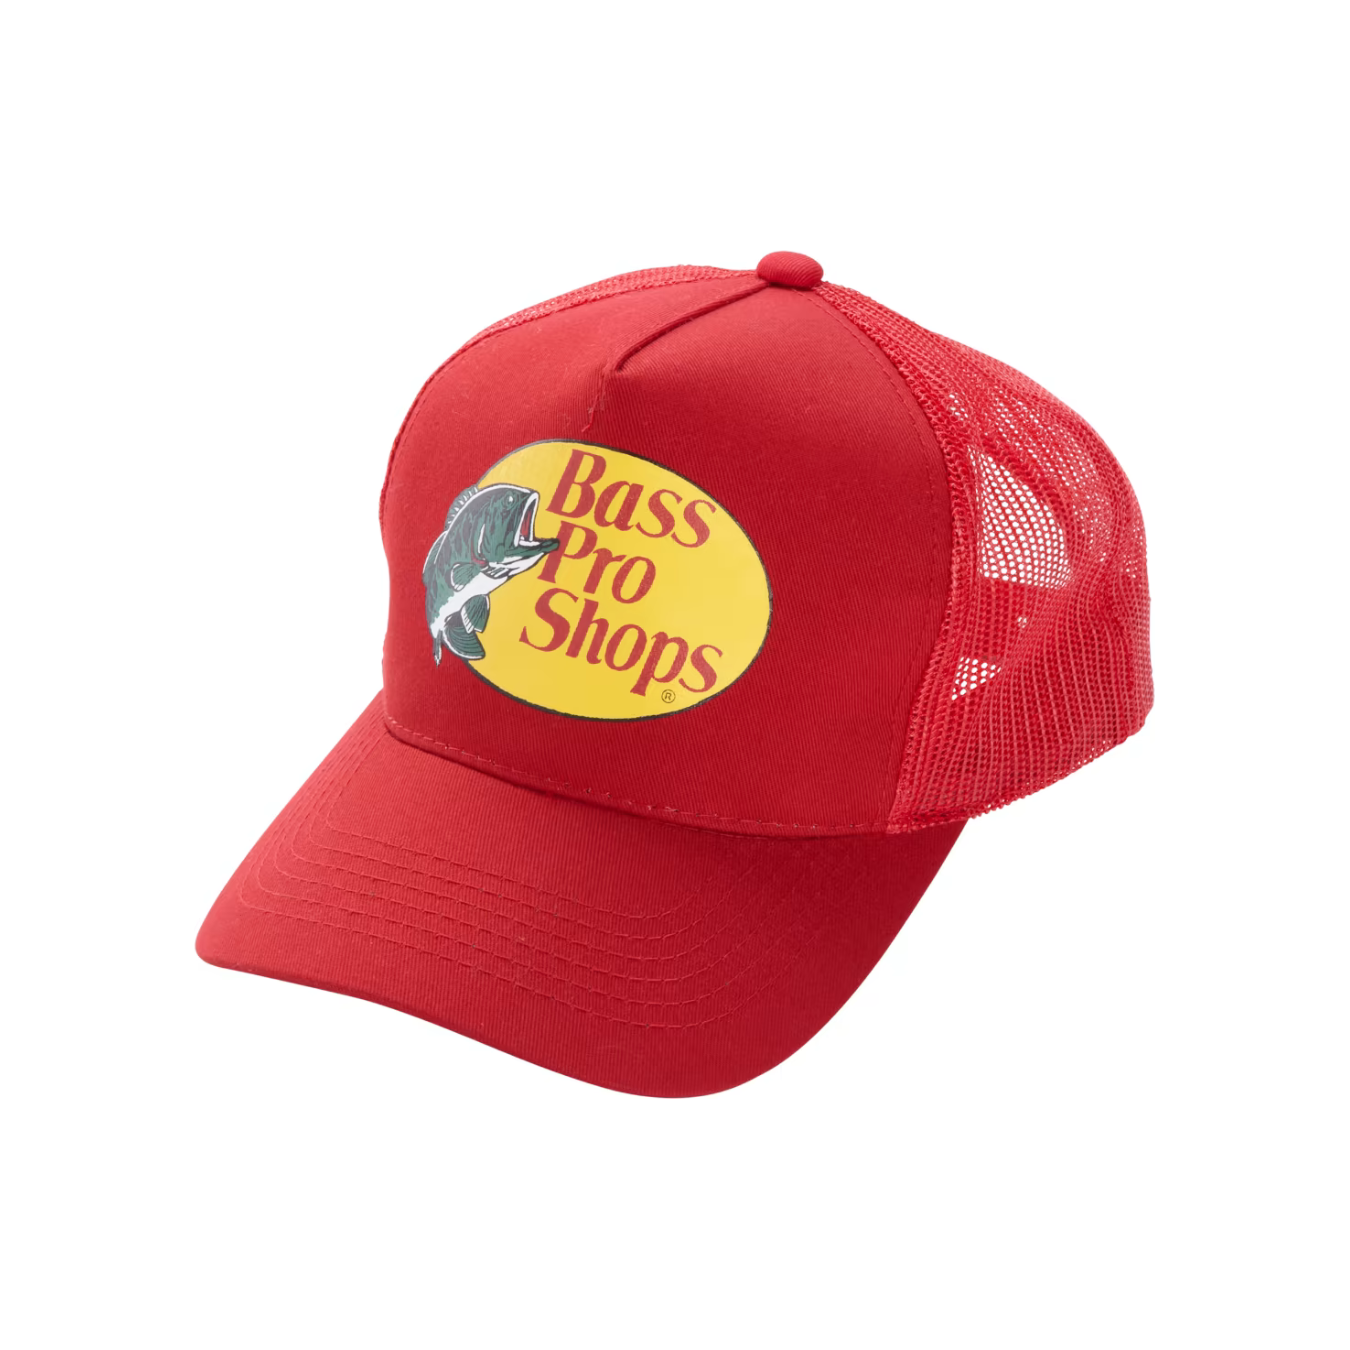 Bass Pro Hat - Red